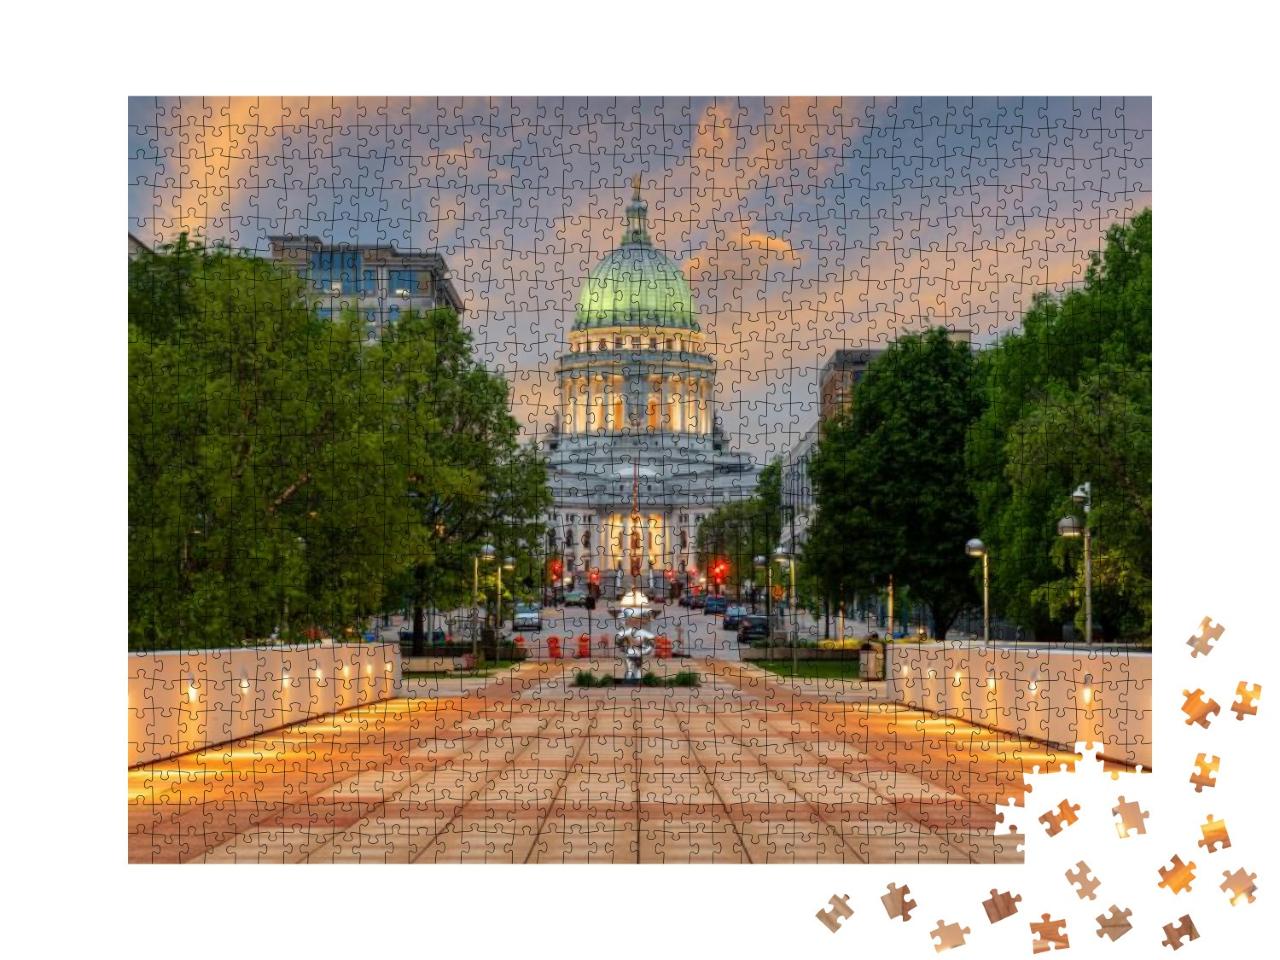 Madison, Wisconsin, USA State Capitol Building At Dusk... Jigsaw Puzzle with 1000 pieces